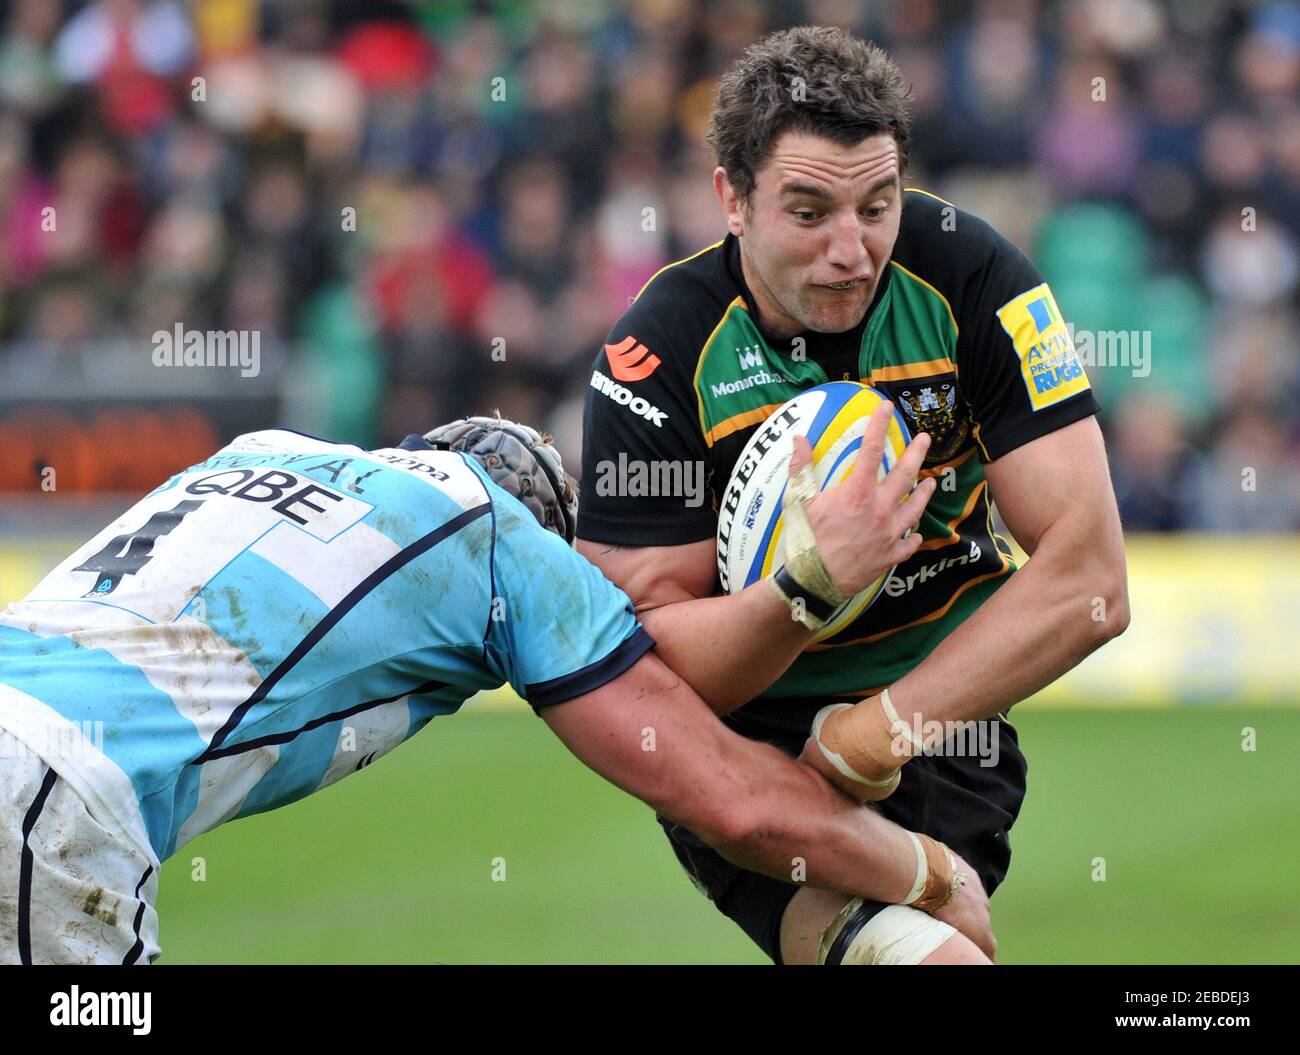 Rugby Union - Northampton Saints v Worcester Warriors Aviva Premiership  - Franklin's Gardens  - 5/5/12  Northampton's Phil Dowson (R) in action against Worcester's James Percival   Mandatory Credit: Action Images / Adam Holt  Livepic Stock Photo